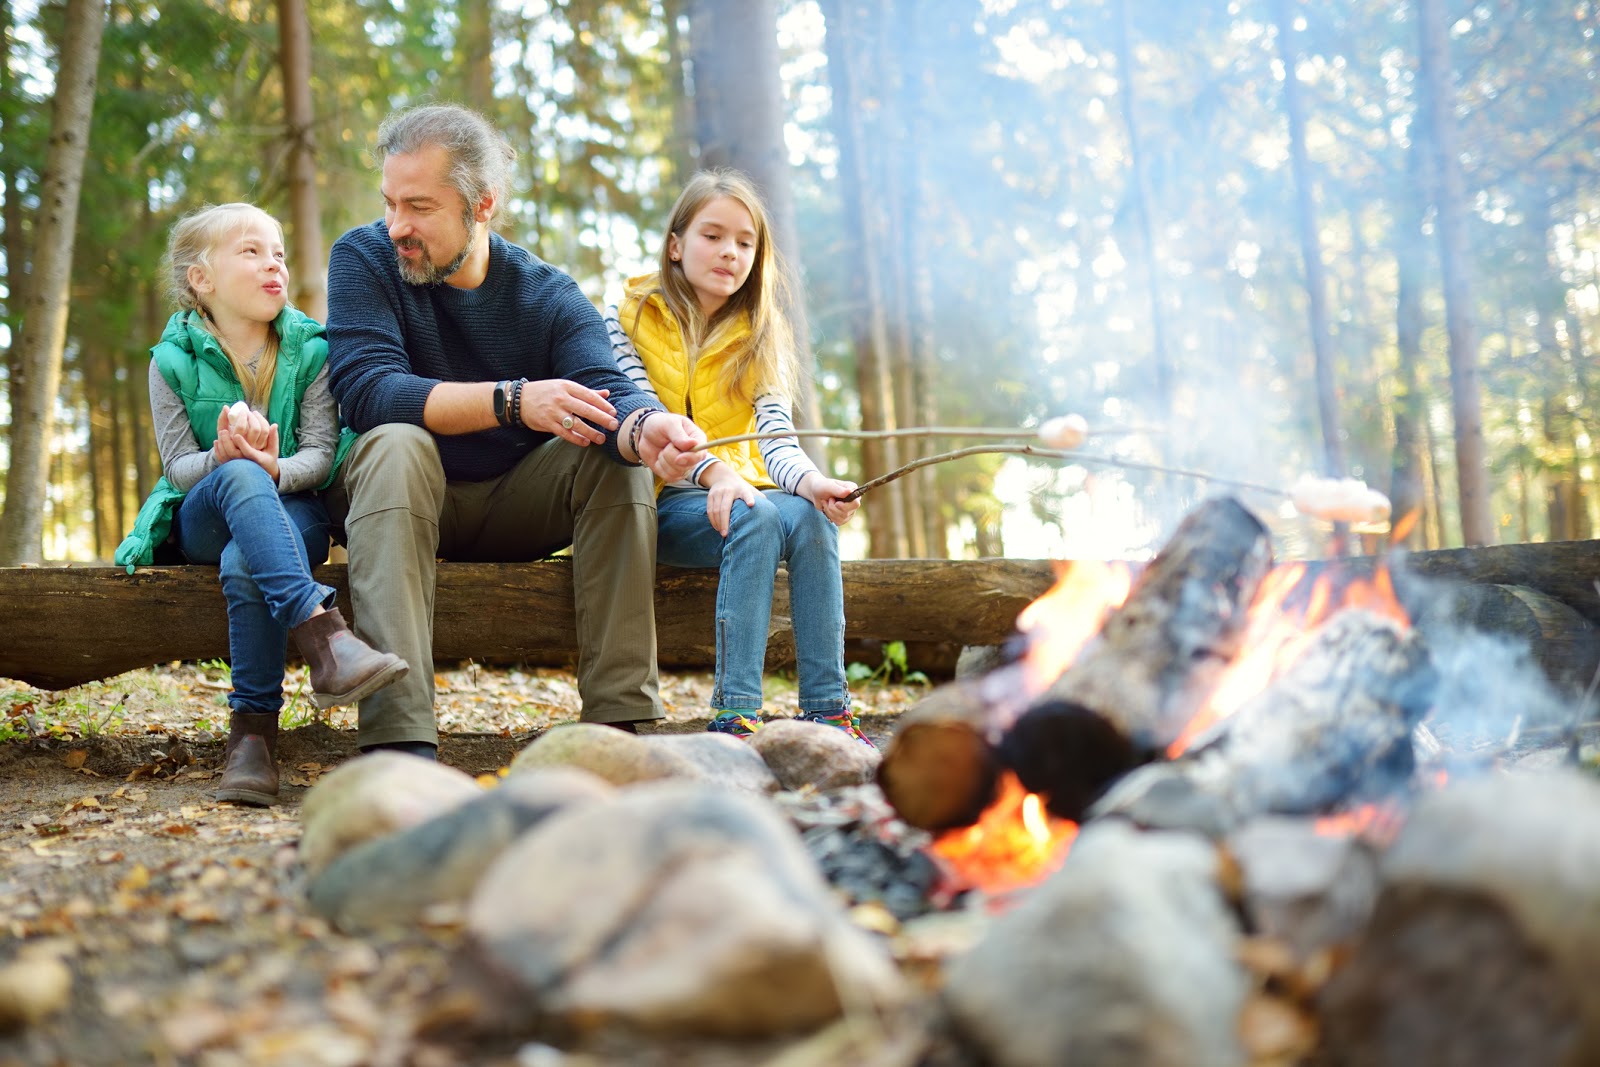 A father with his two daughters sitting by a campfire in the woods roasting marshmallows